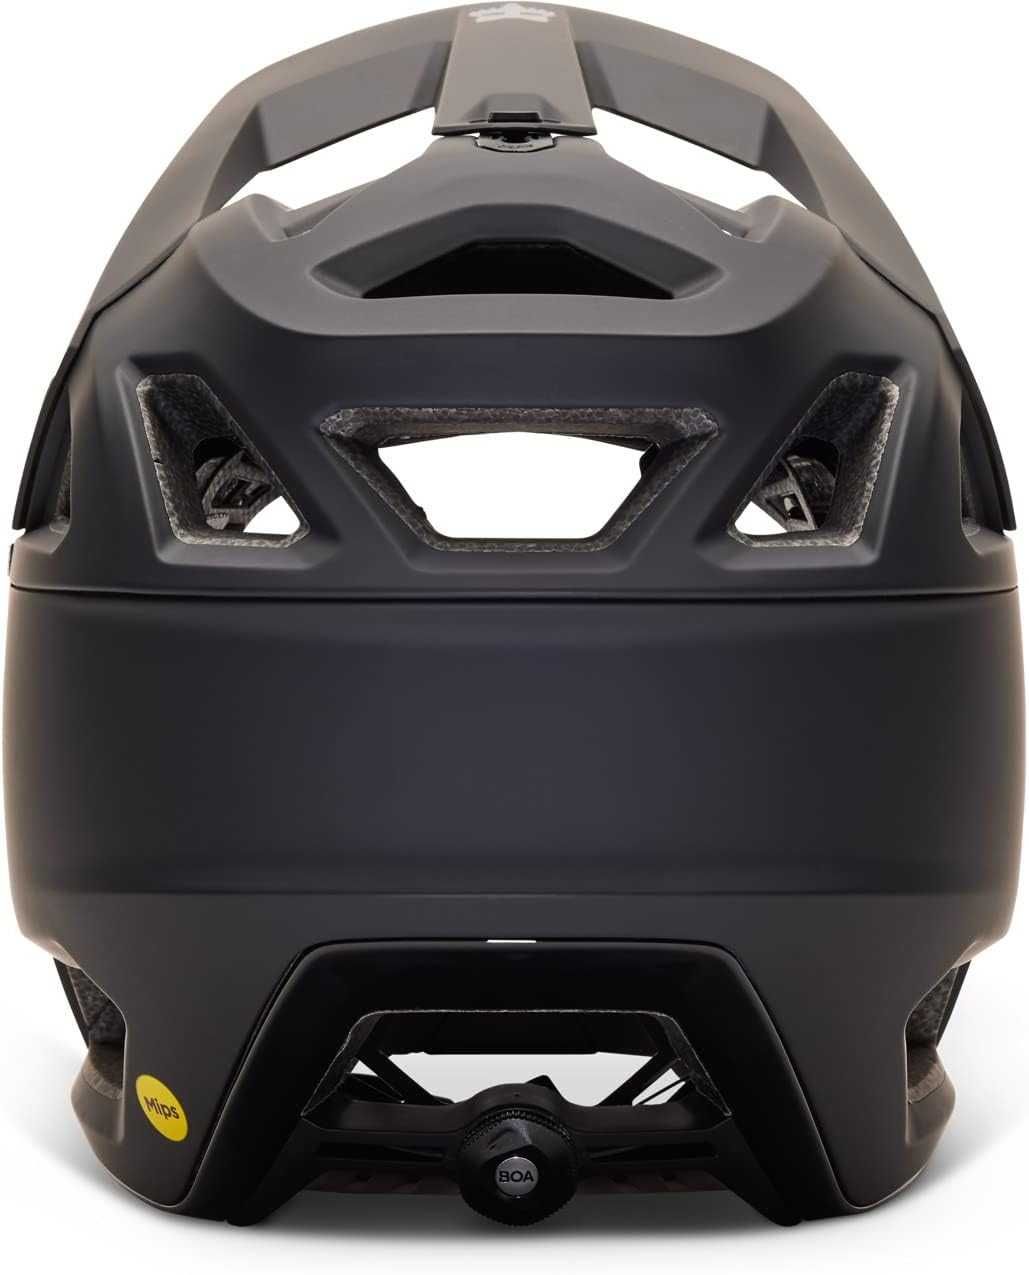 Kask rowerowy Full Face FOX Proframe RS MIPS dh rozmiar M